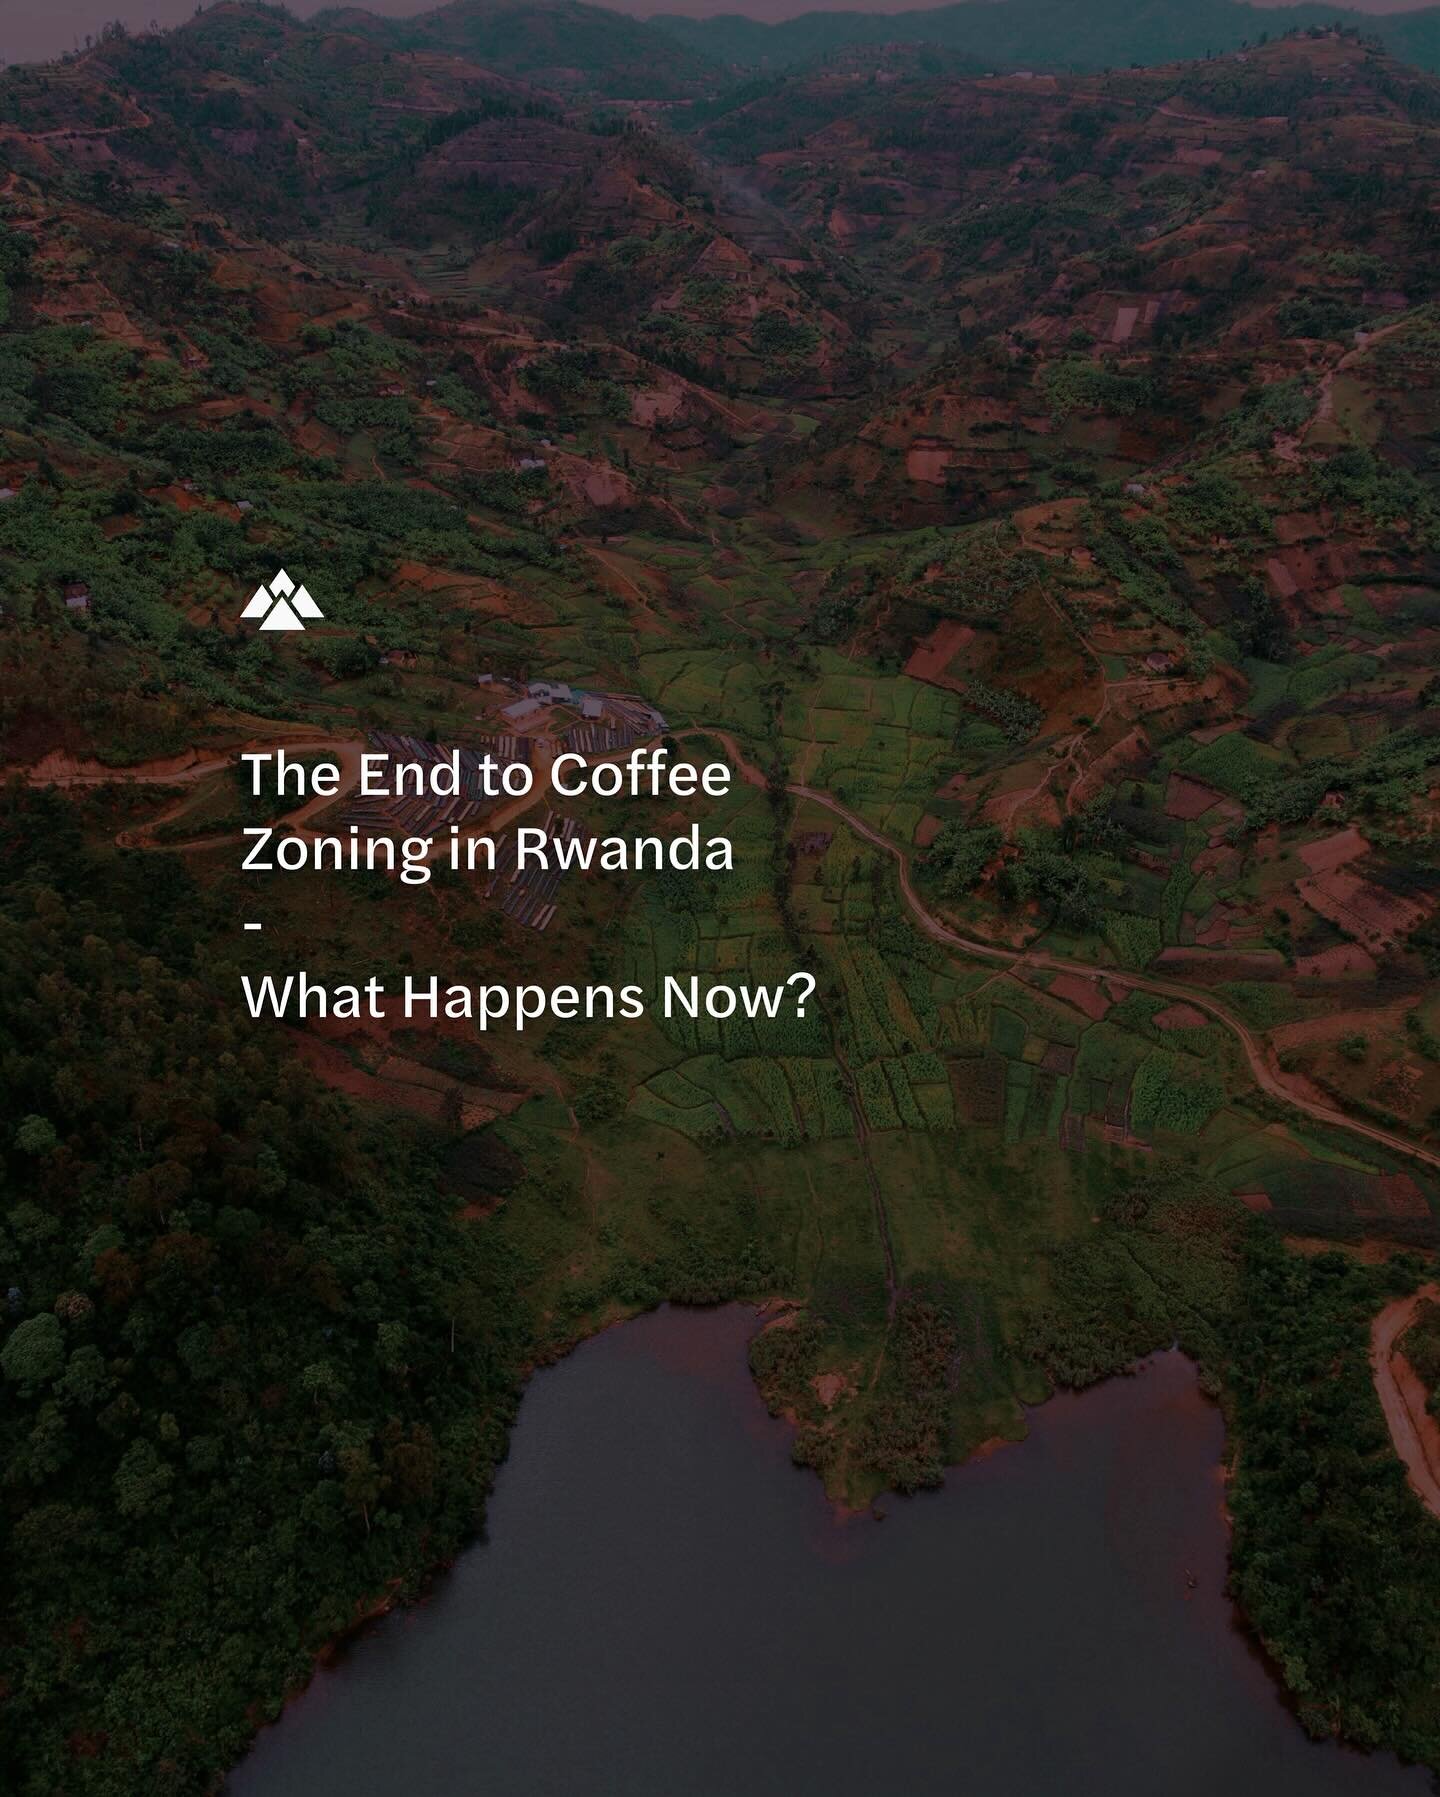 We&rsquo;ve got a new long form post up on the blog. This week, Al discusses the end of coffee zoning in Rwanda, and what can happen in light of the change.

Head to our bio to read the article in full.